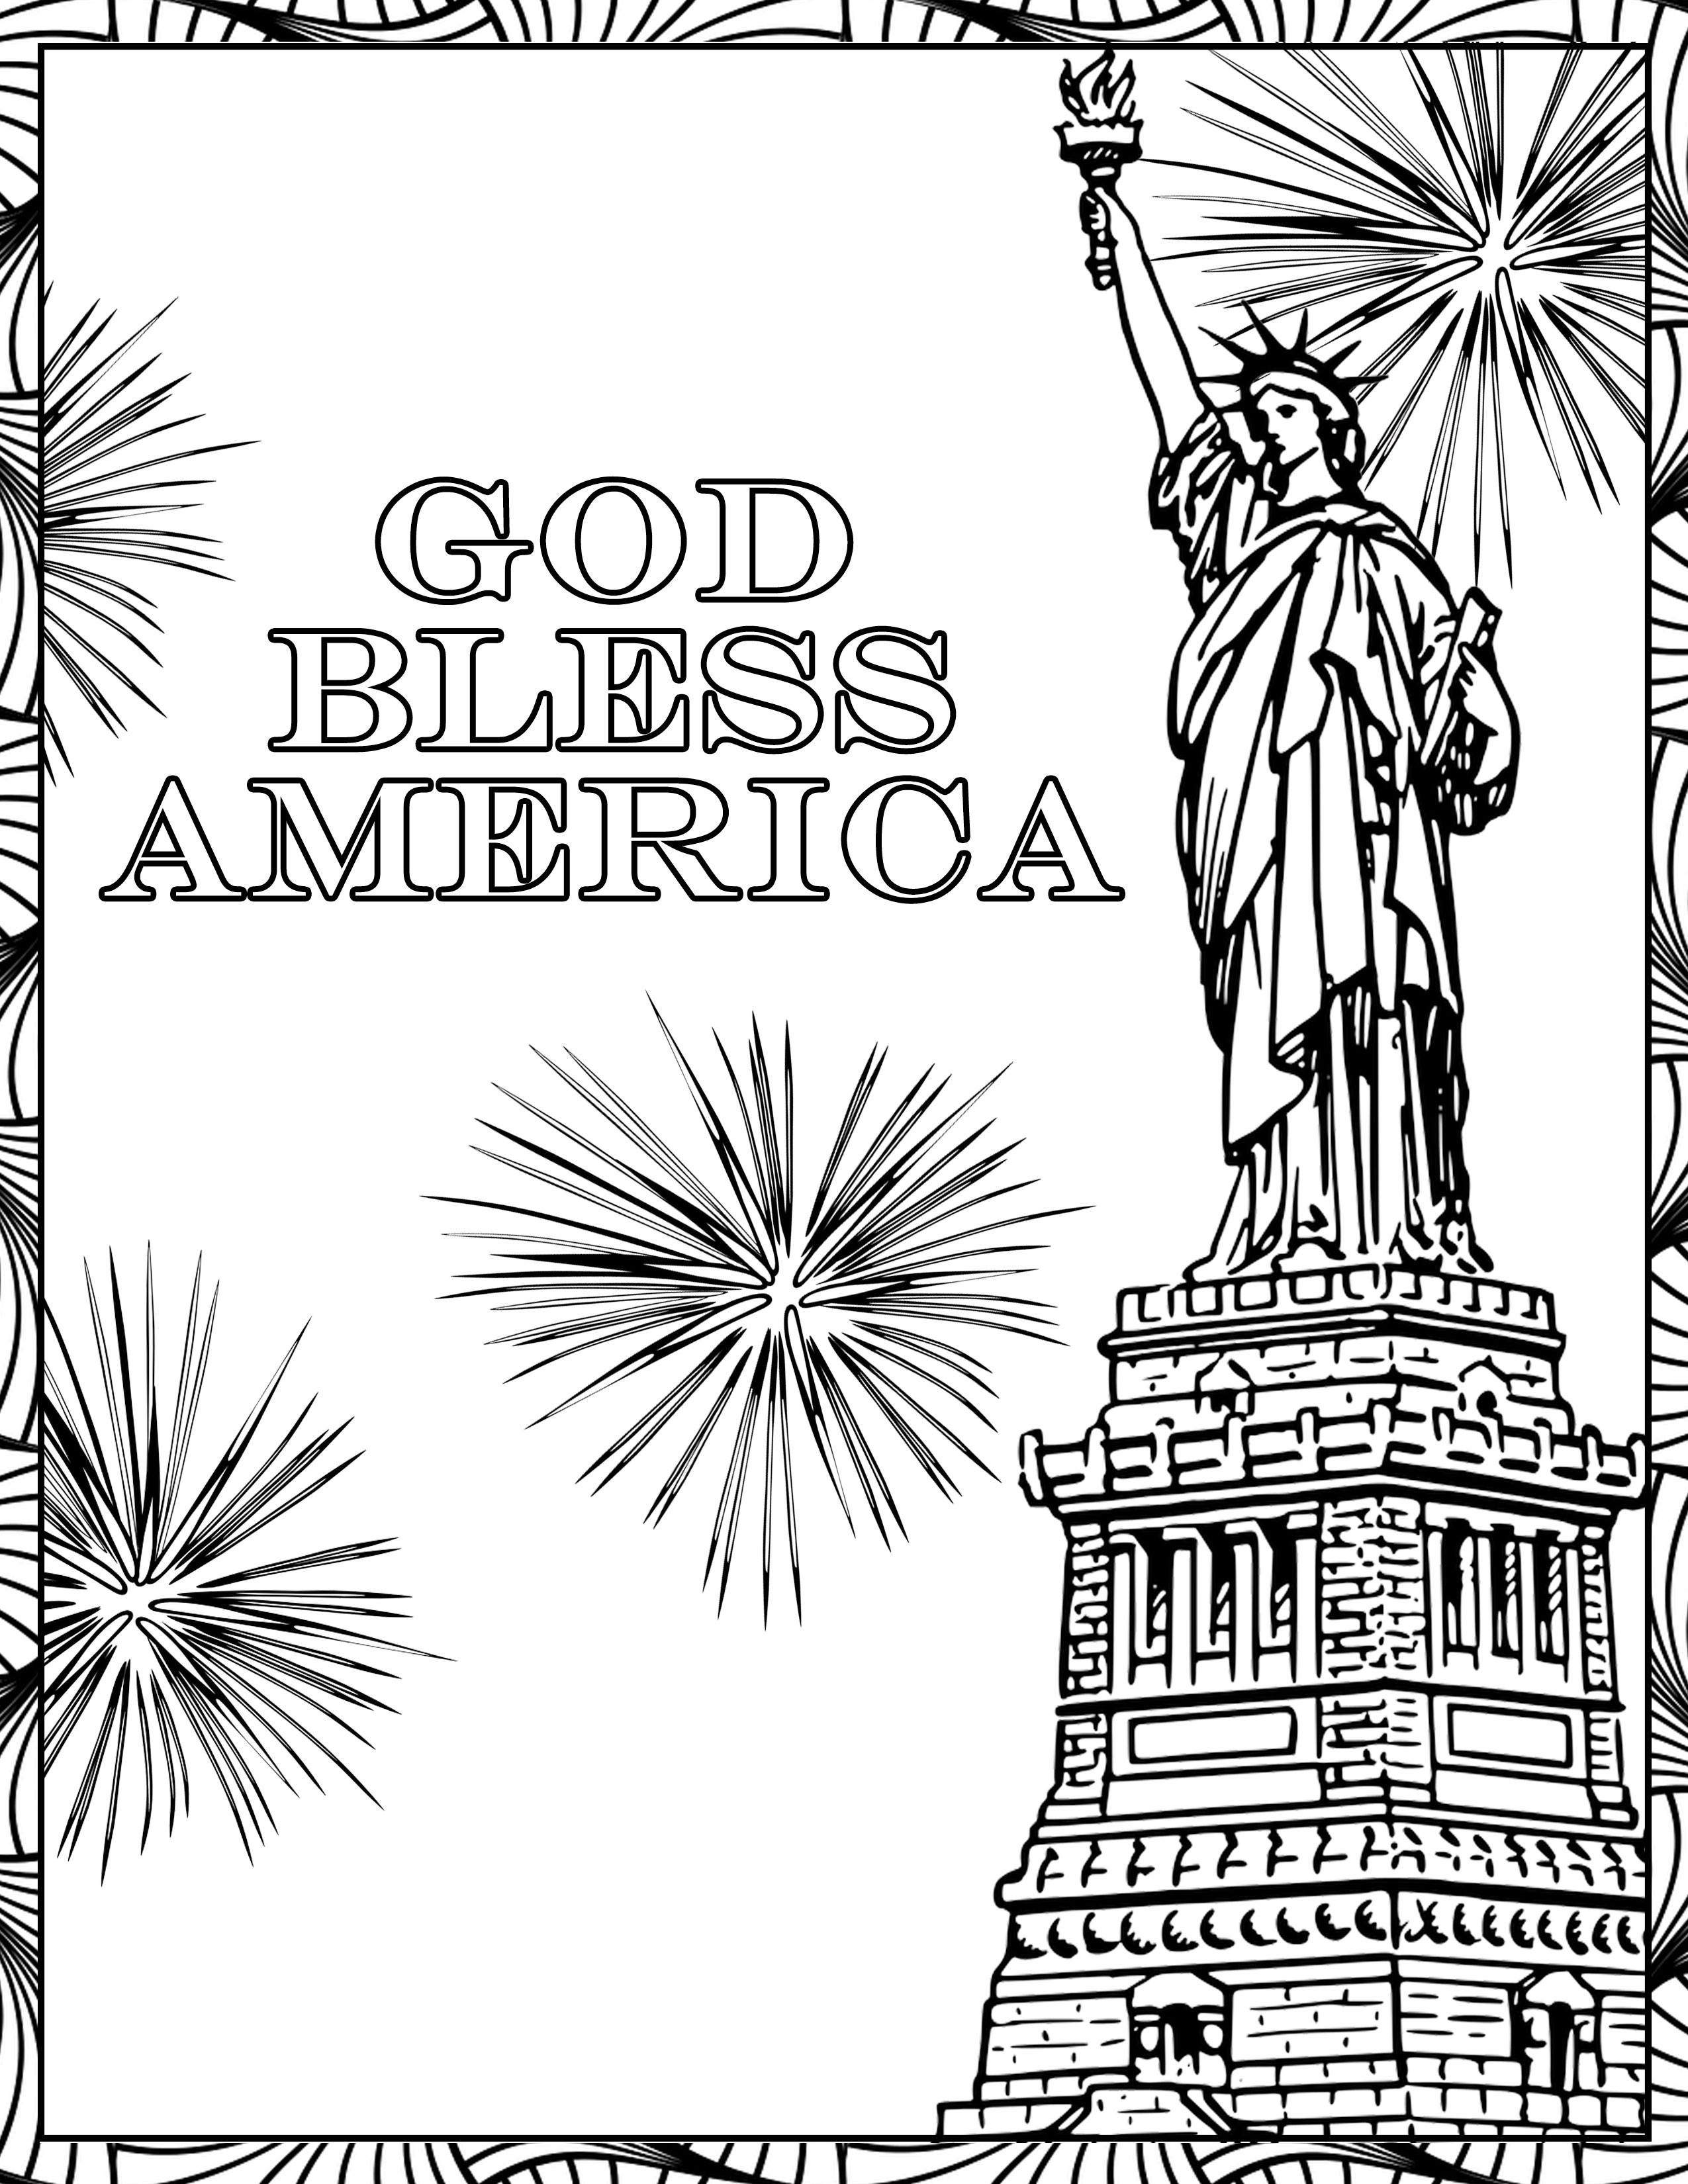 July 4th Coloring Pages Christianbook com Blog